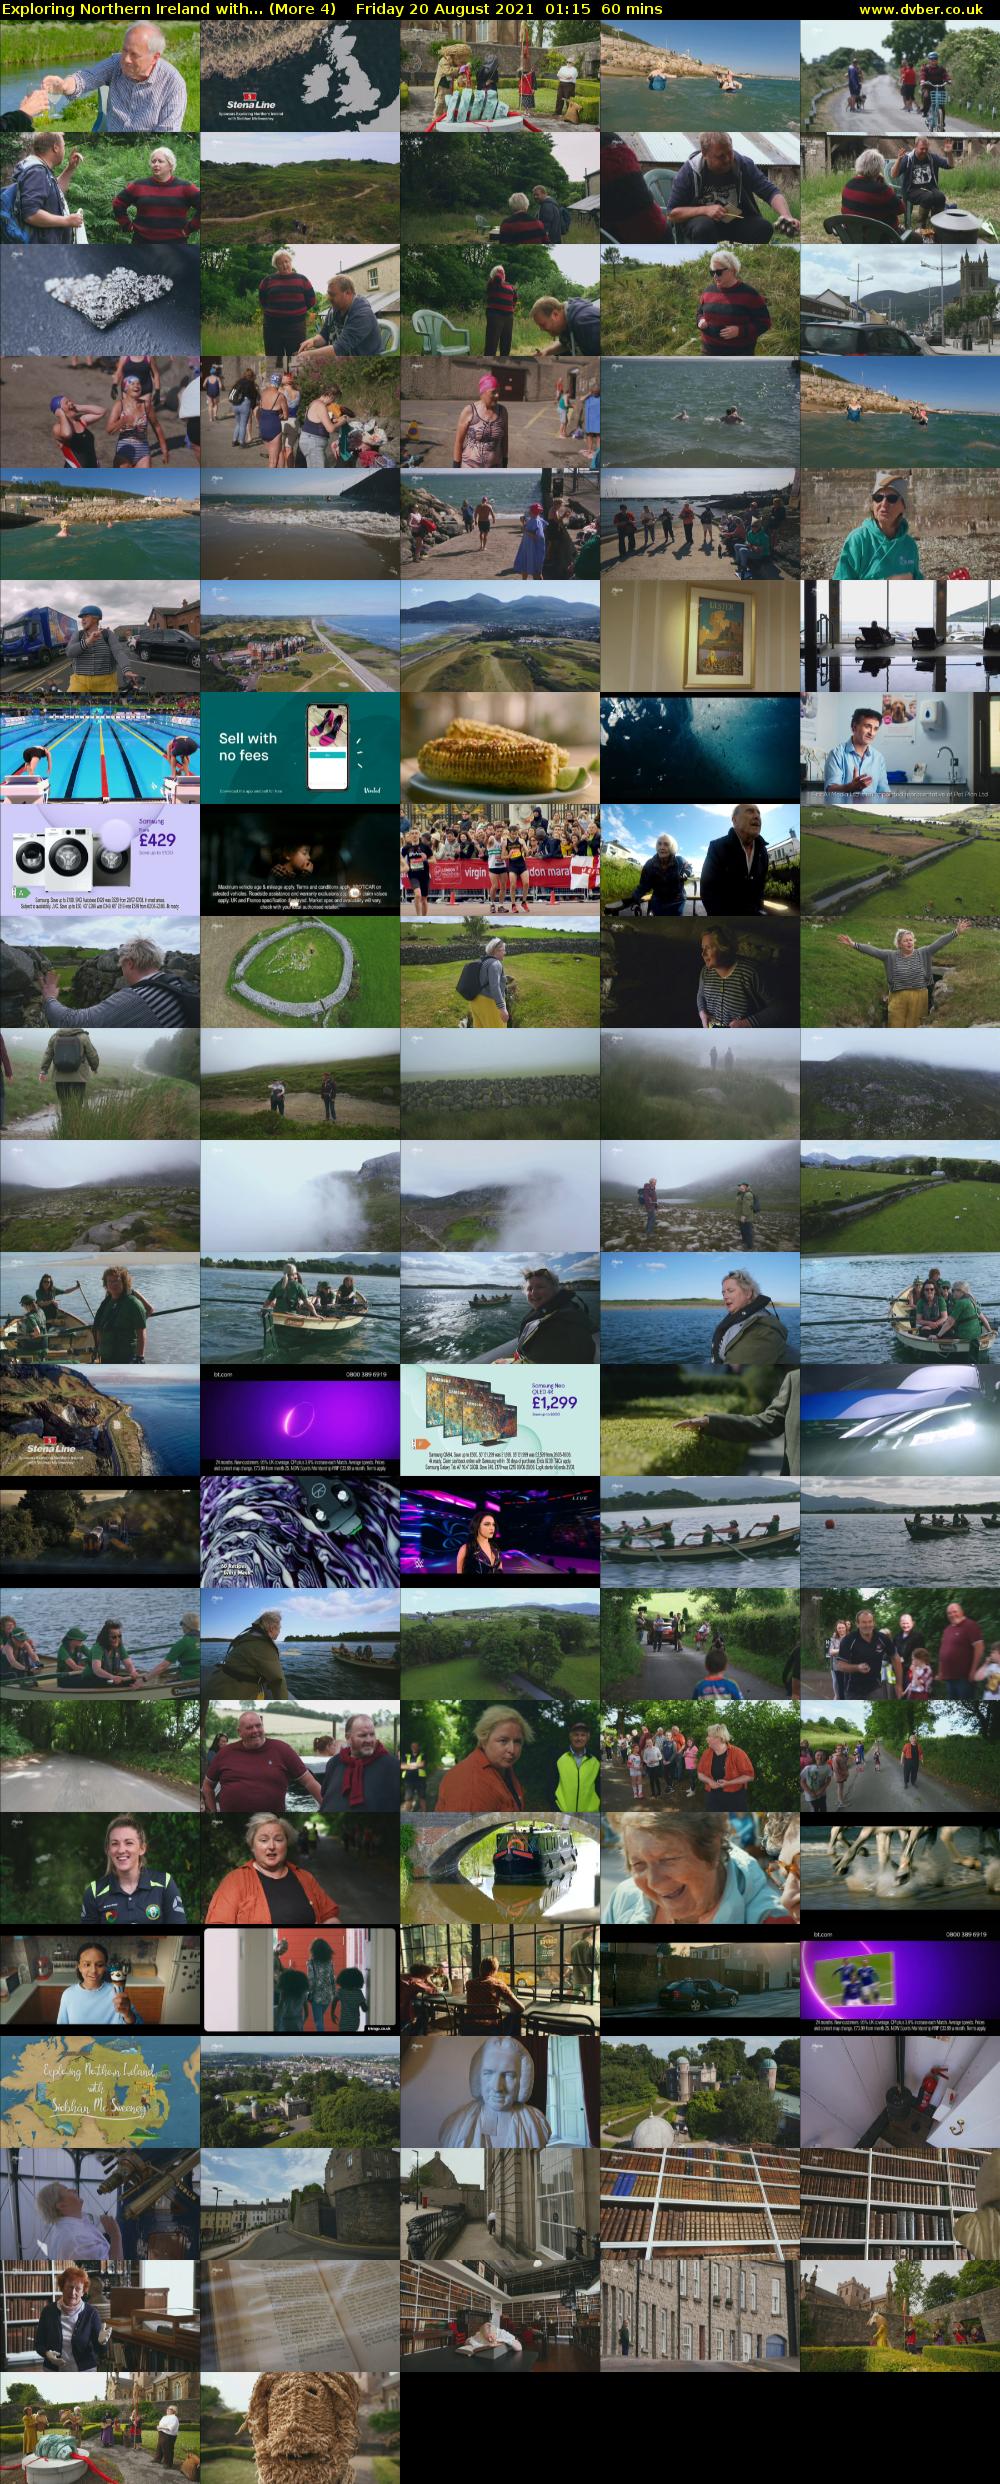 Exploring Northern Ireland with... (More 4) Friday 20 August 2021 01:15 - 02:15